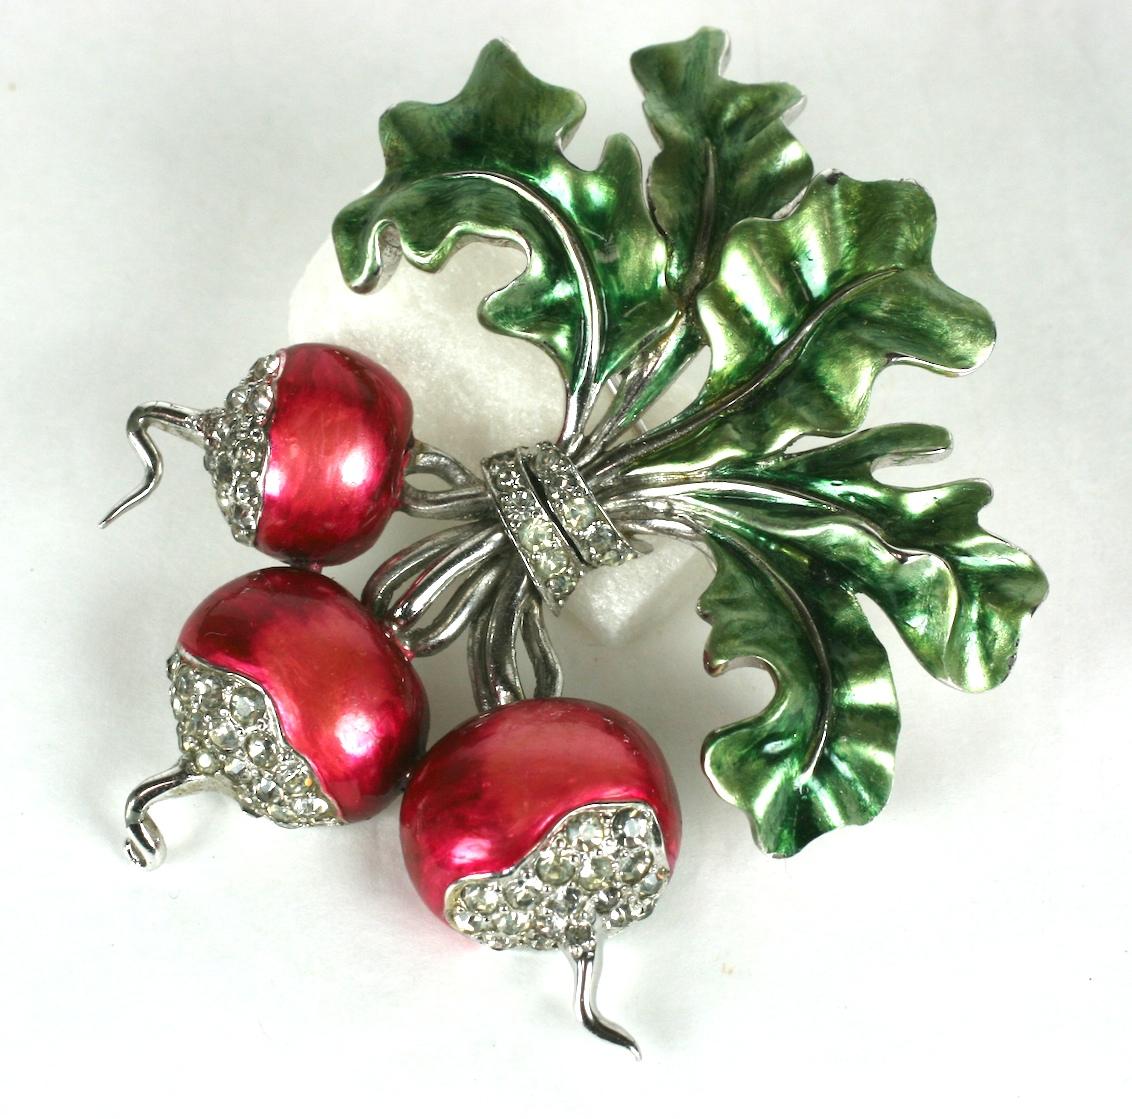 Super rare Marcel Boucher 1941 radish bunch brooch of metallic and pearlized cold enamel with crystal rhinestone pave set in rhodium plate.  Especially rare with original enamel. 
Excellent Condition.
Length 3